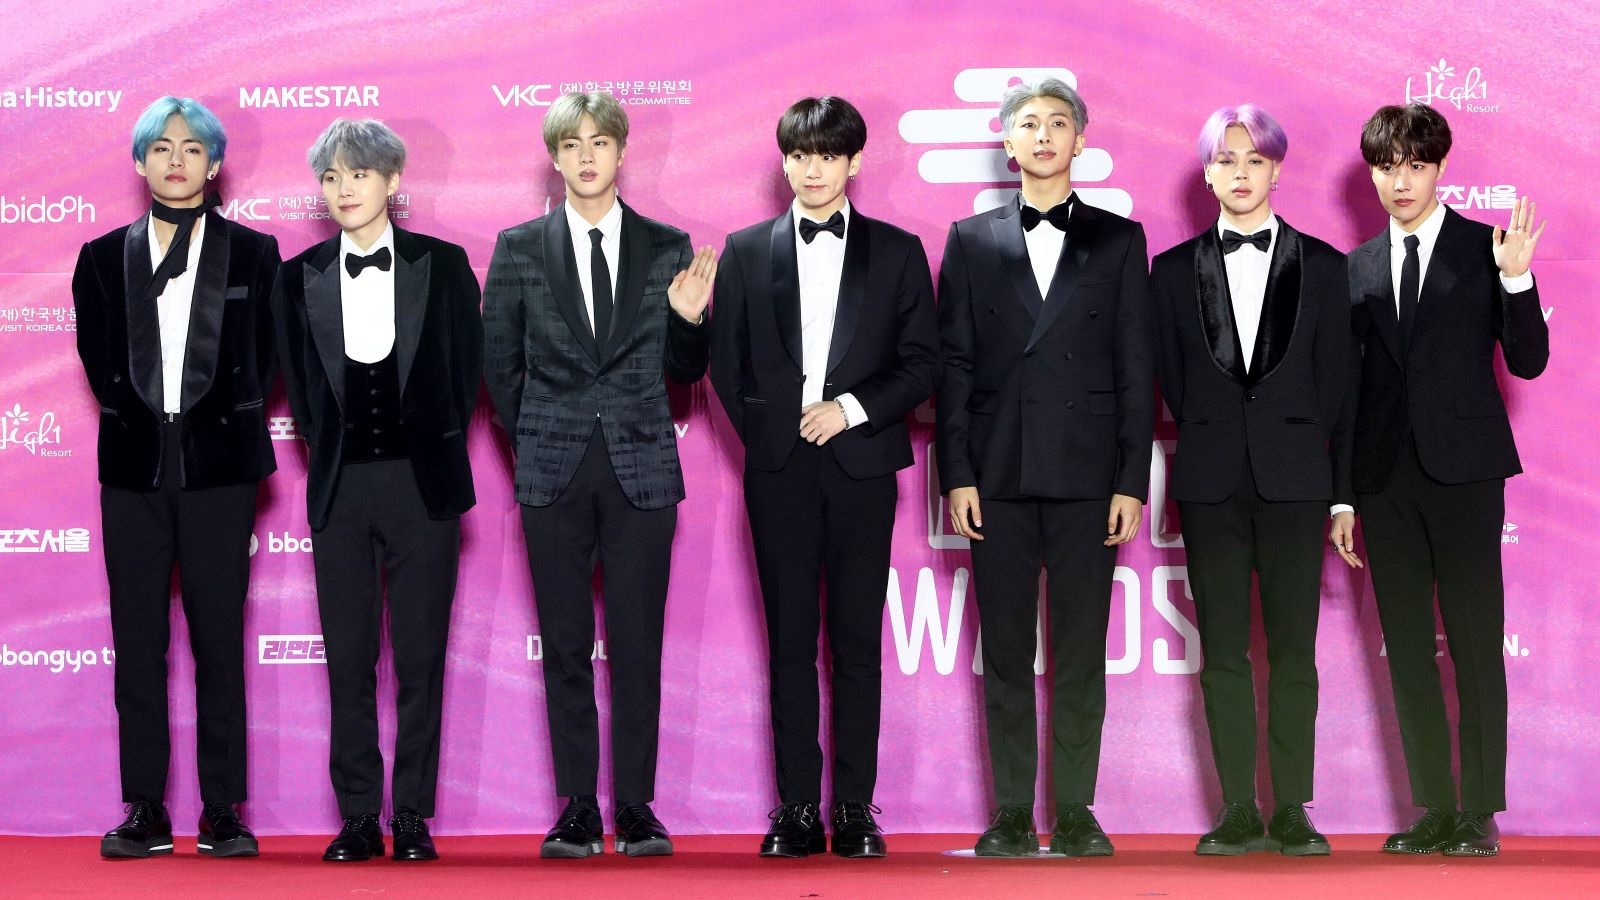 BTS fans’ outrage over controversial announcement leads South Korean president to go private on Twitter